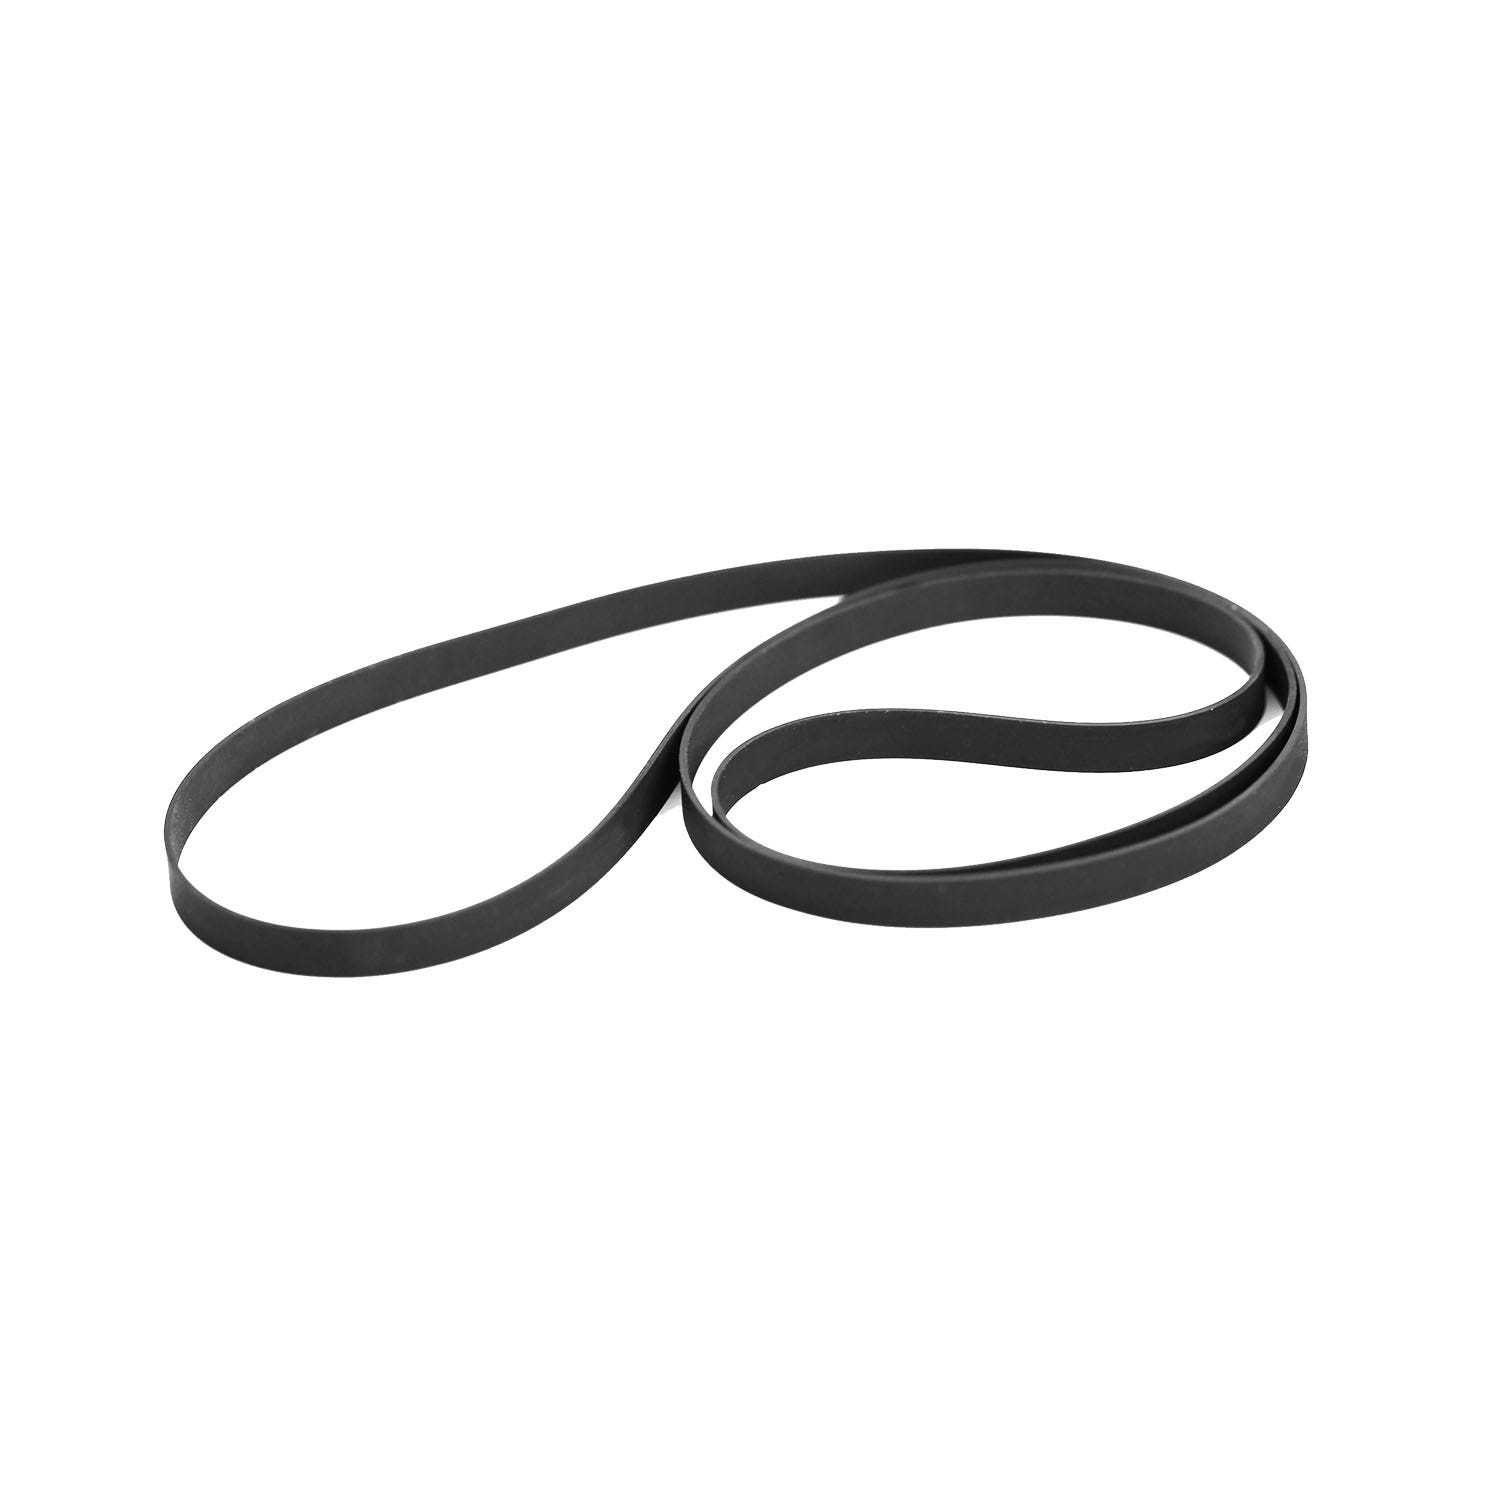 Turntable Rubber Belt for Reference Record Players